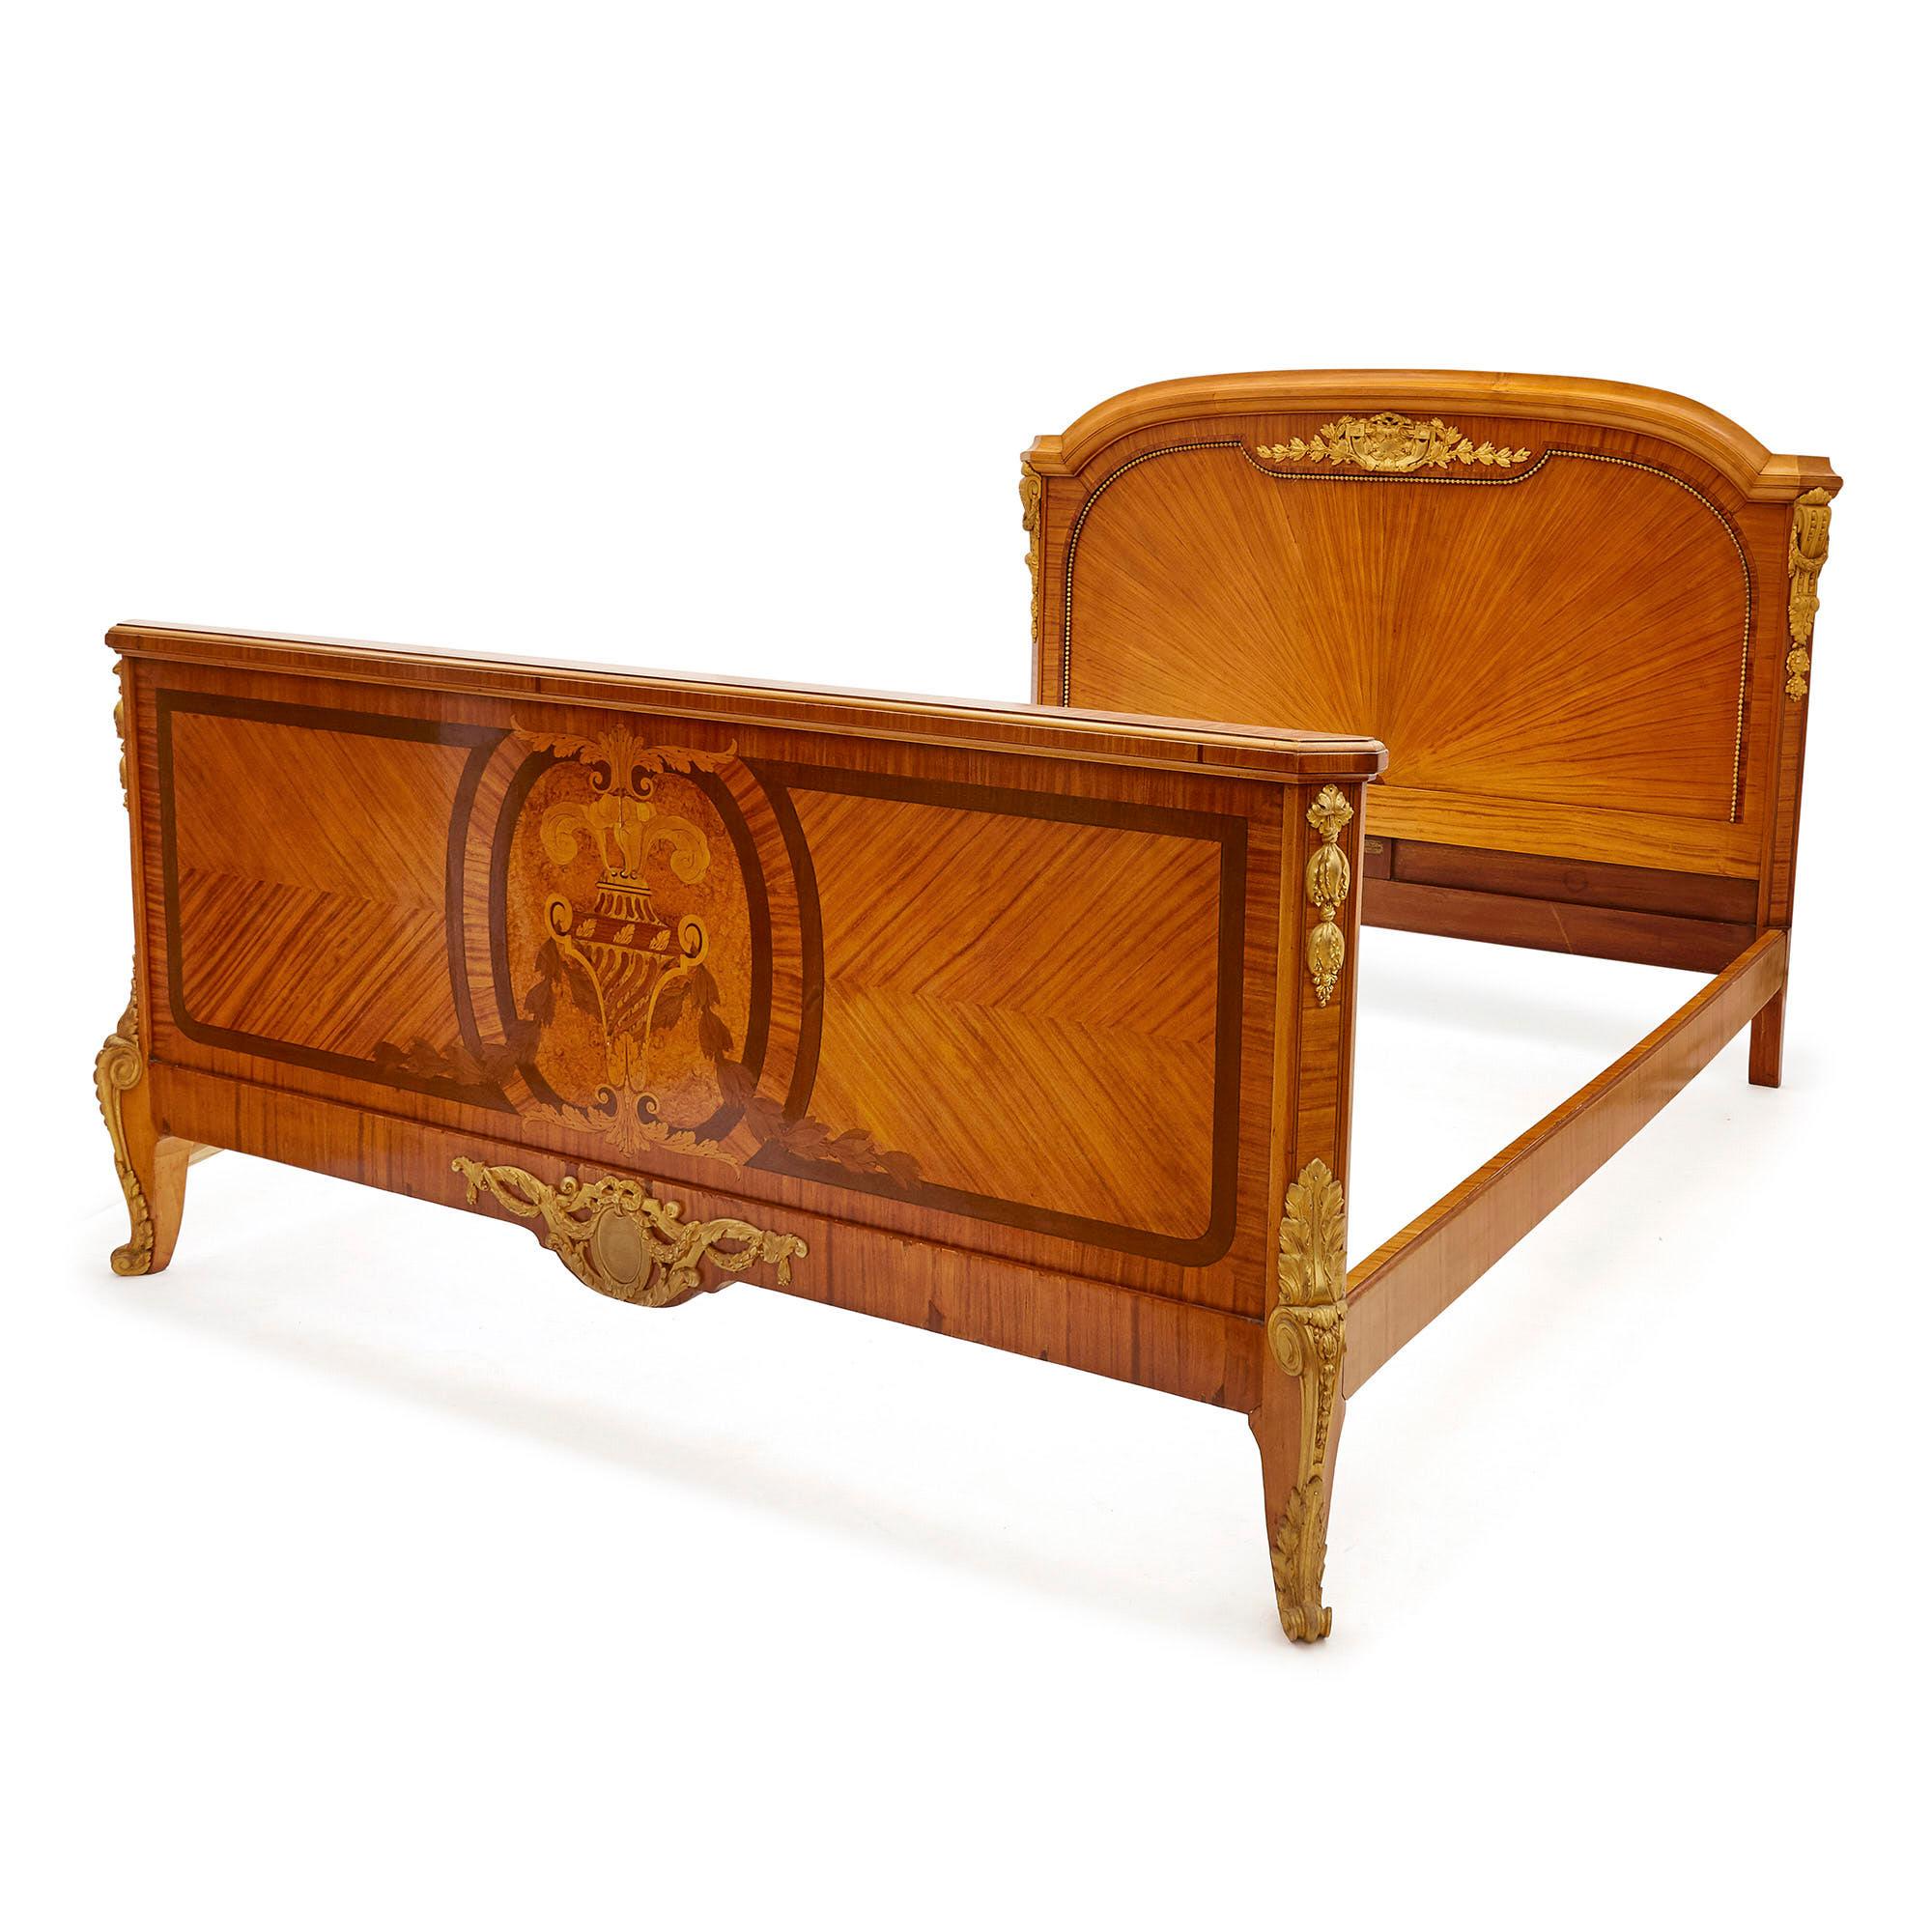 Antique Parisian Marquetry and gilt bronze bed by Au Gros Chêne
French, late 19th century
Dimensions: Height 127cm, width 167cm, depth 212cm

This elegant bed is designed in the late 19th Century French Neoclassical style, retailed by Parisian